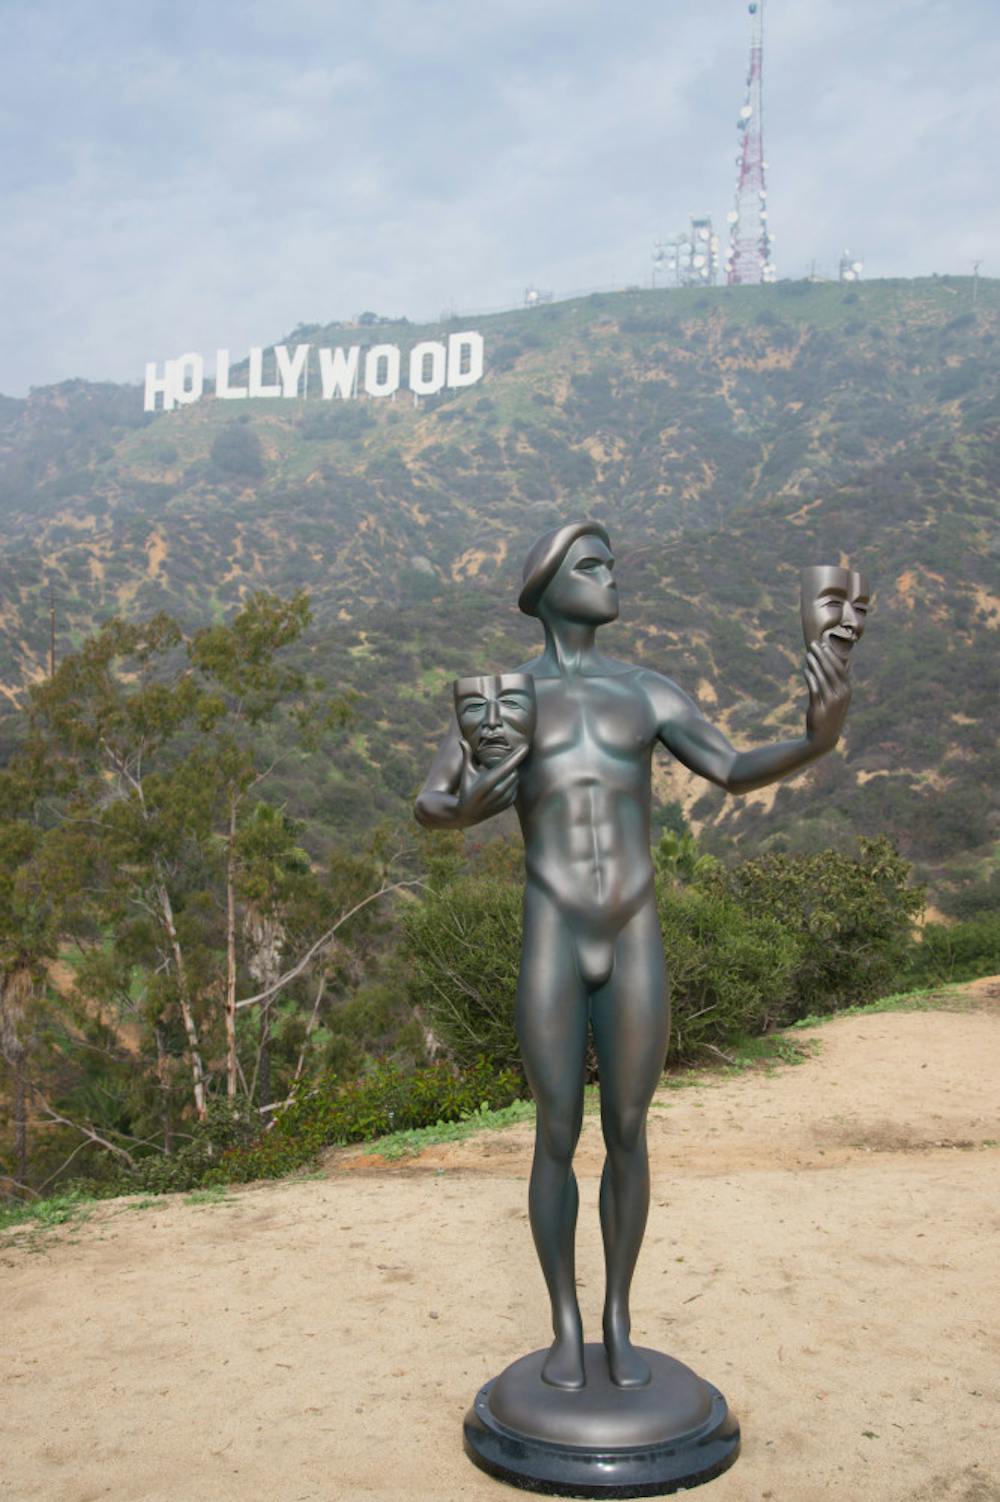 <p>The Screen Actors Guild Awards actor statuette appears near the Hollywood Sign on Tuesday, Jan 20, 2015, in Los Angeles. The SAG awards will be presented on Jan. 25. (Photo by Rob Latour/Invision/AP)</p>